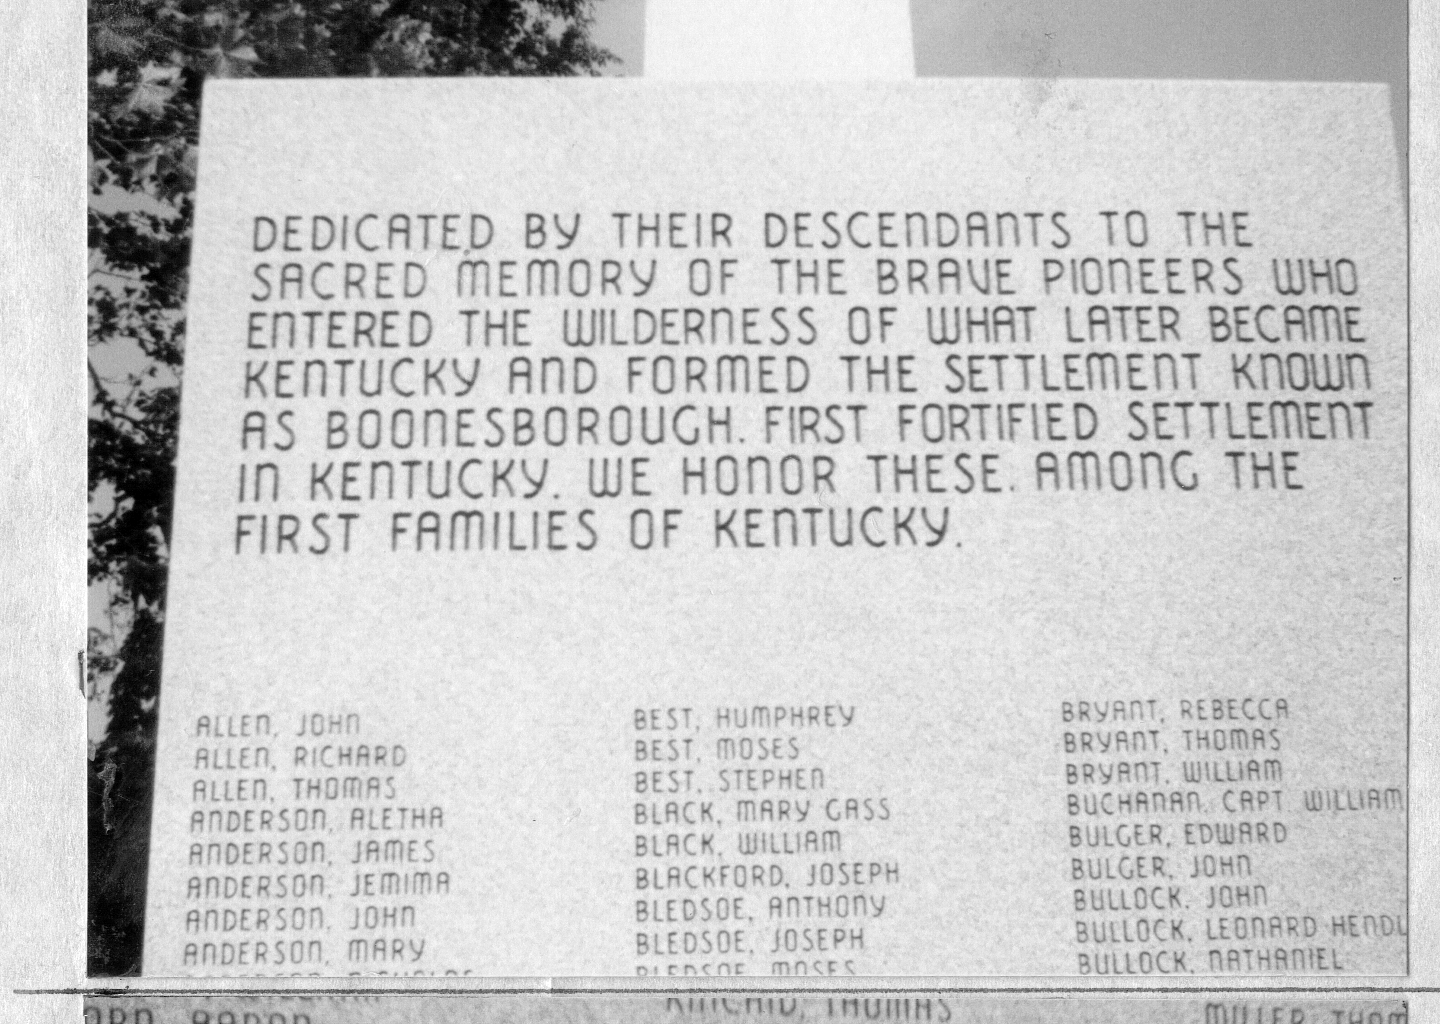 close up photograph showing the text on the memorial